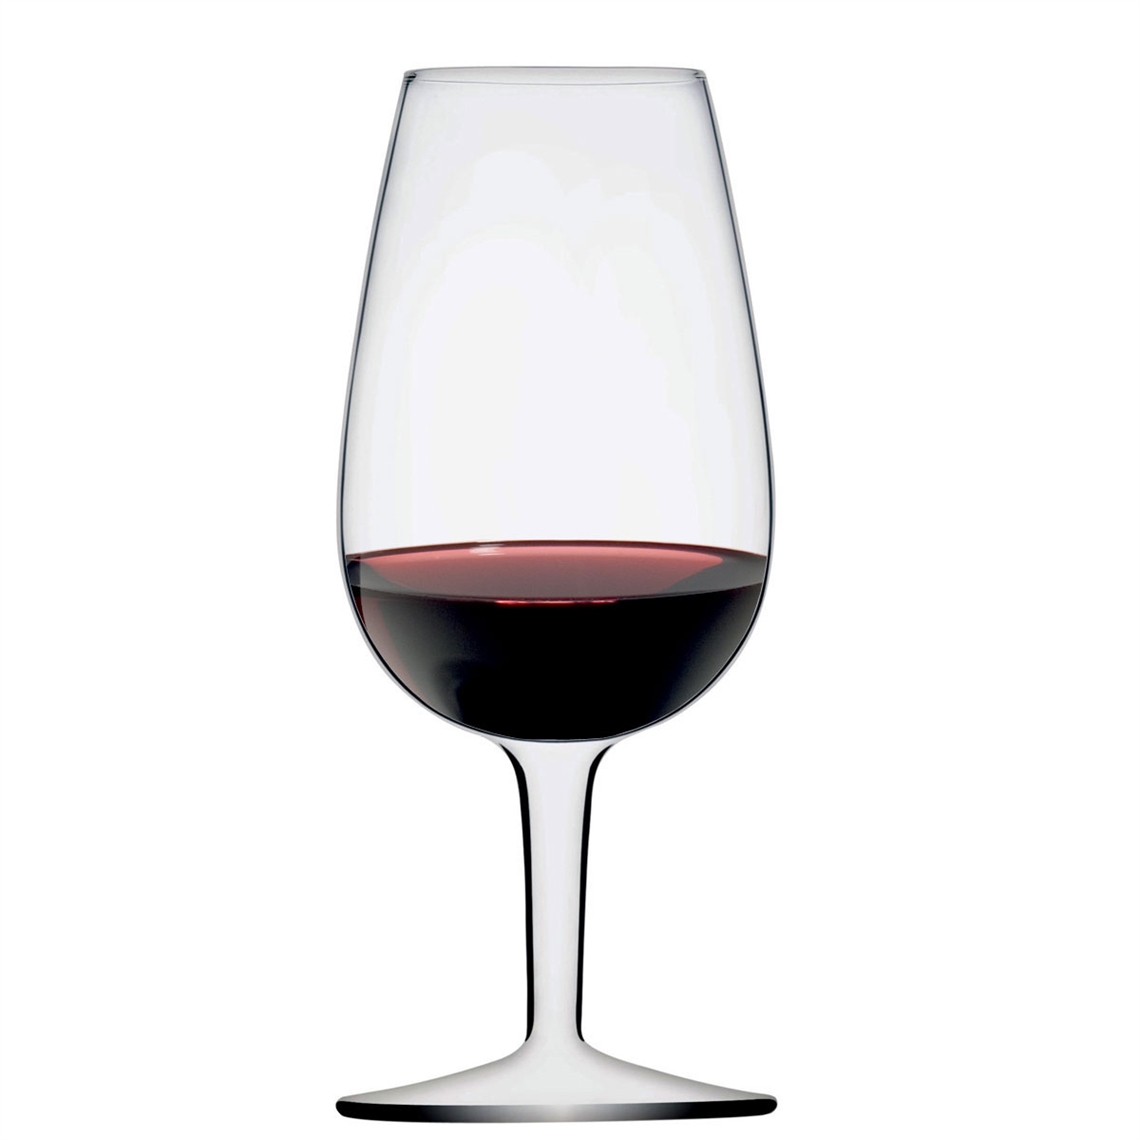 View more sydonios from our Wine Tasting Glasses range